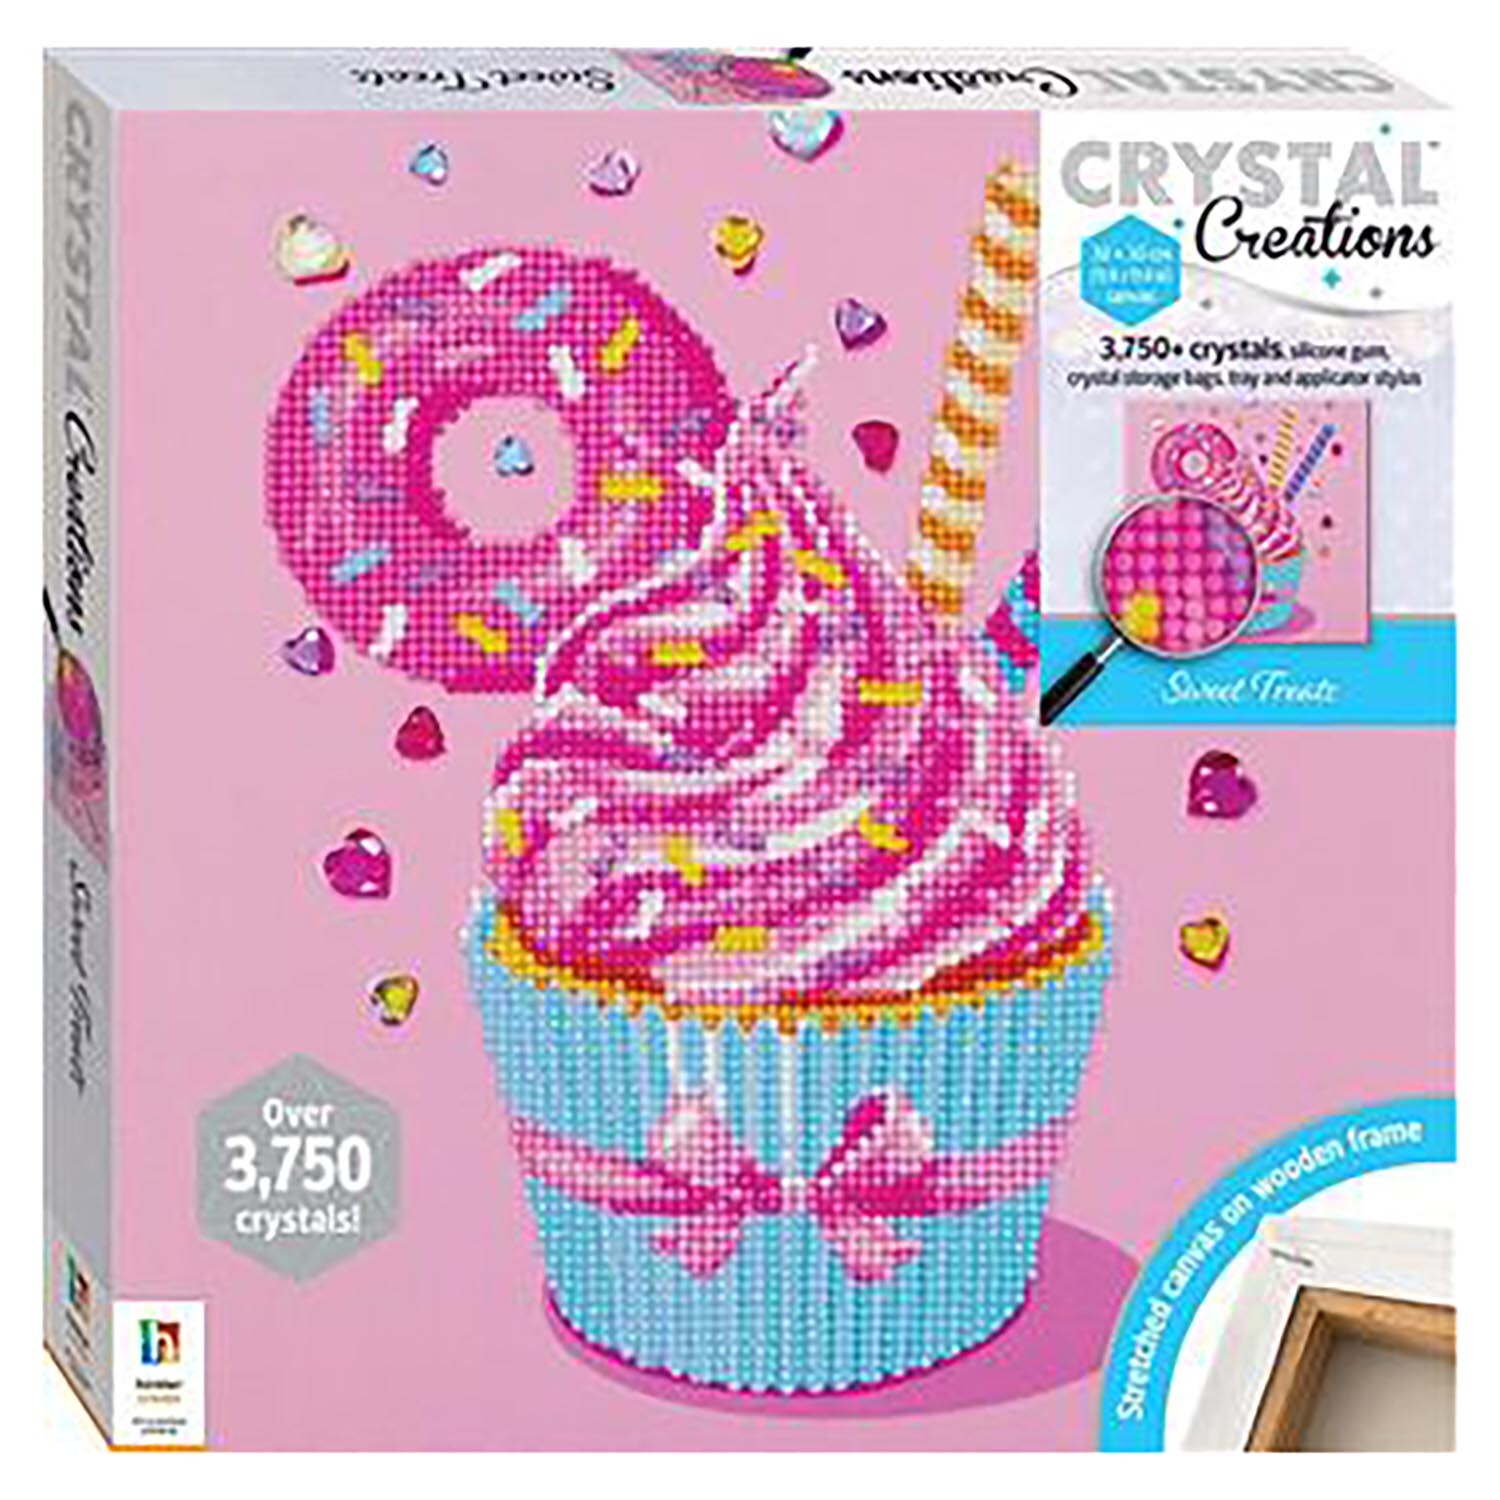 Hinkler Crystal Creations Canvas Assortment Image 2